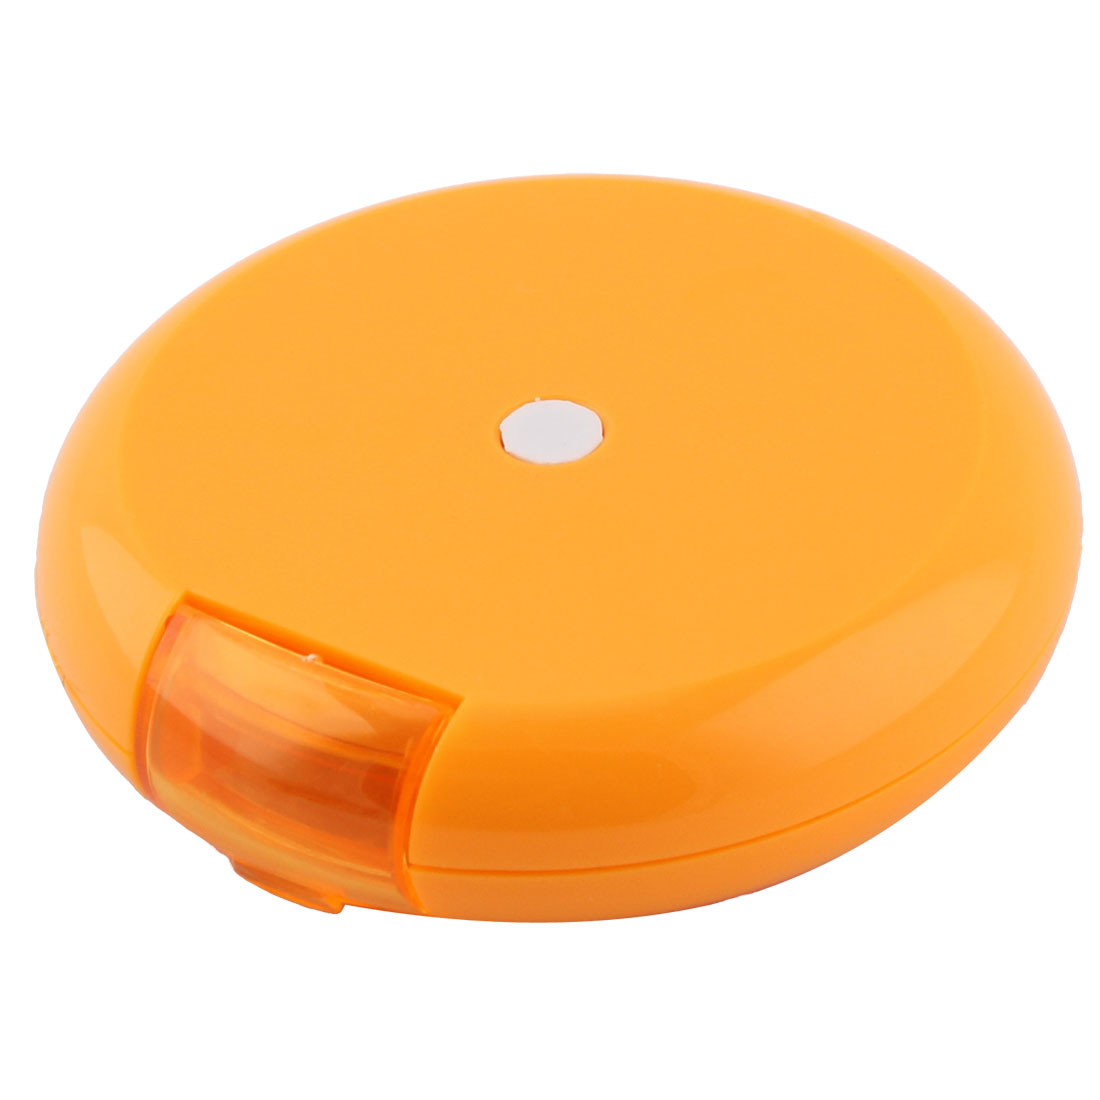 uxcell Uxcell Household Cute Fruit Style Button Rotate Weekly Pill Box Case Orange